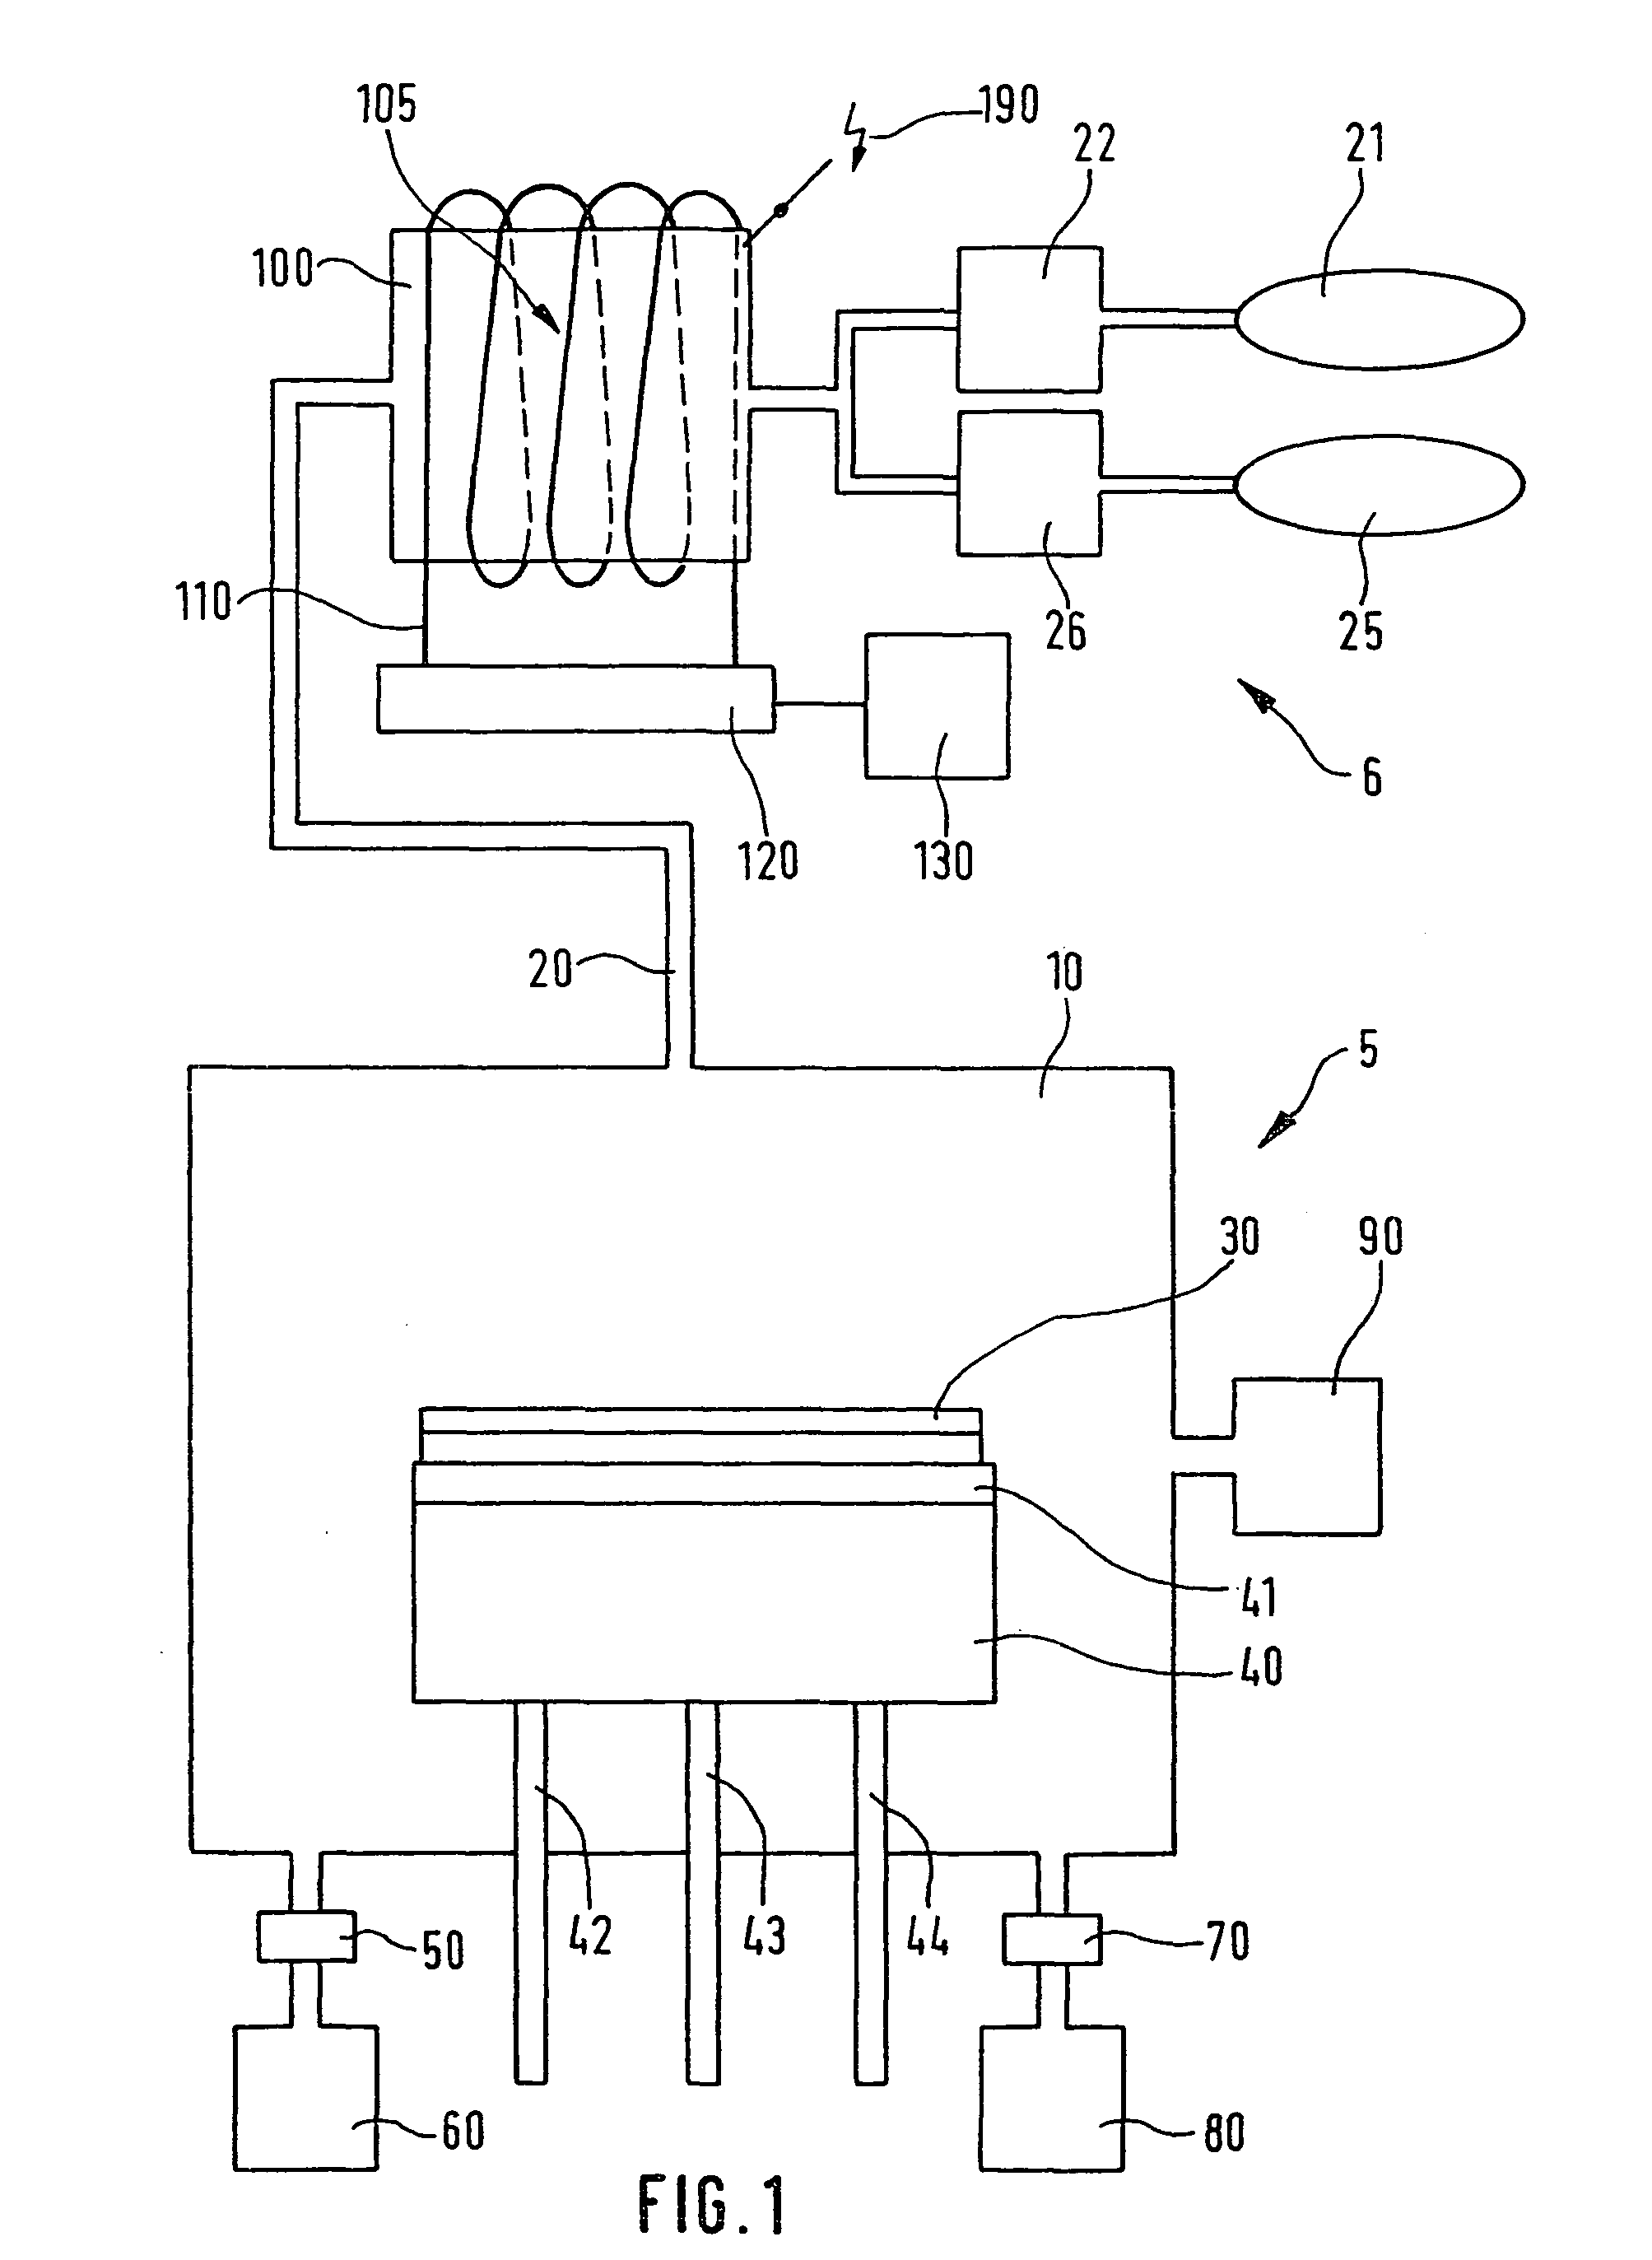 Device and method for producing chlorine trifluoride and system for etching semiconductor substrates using this device